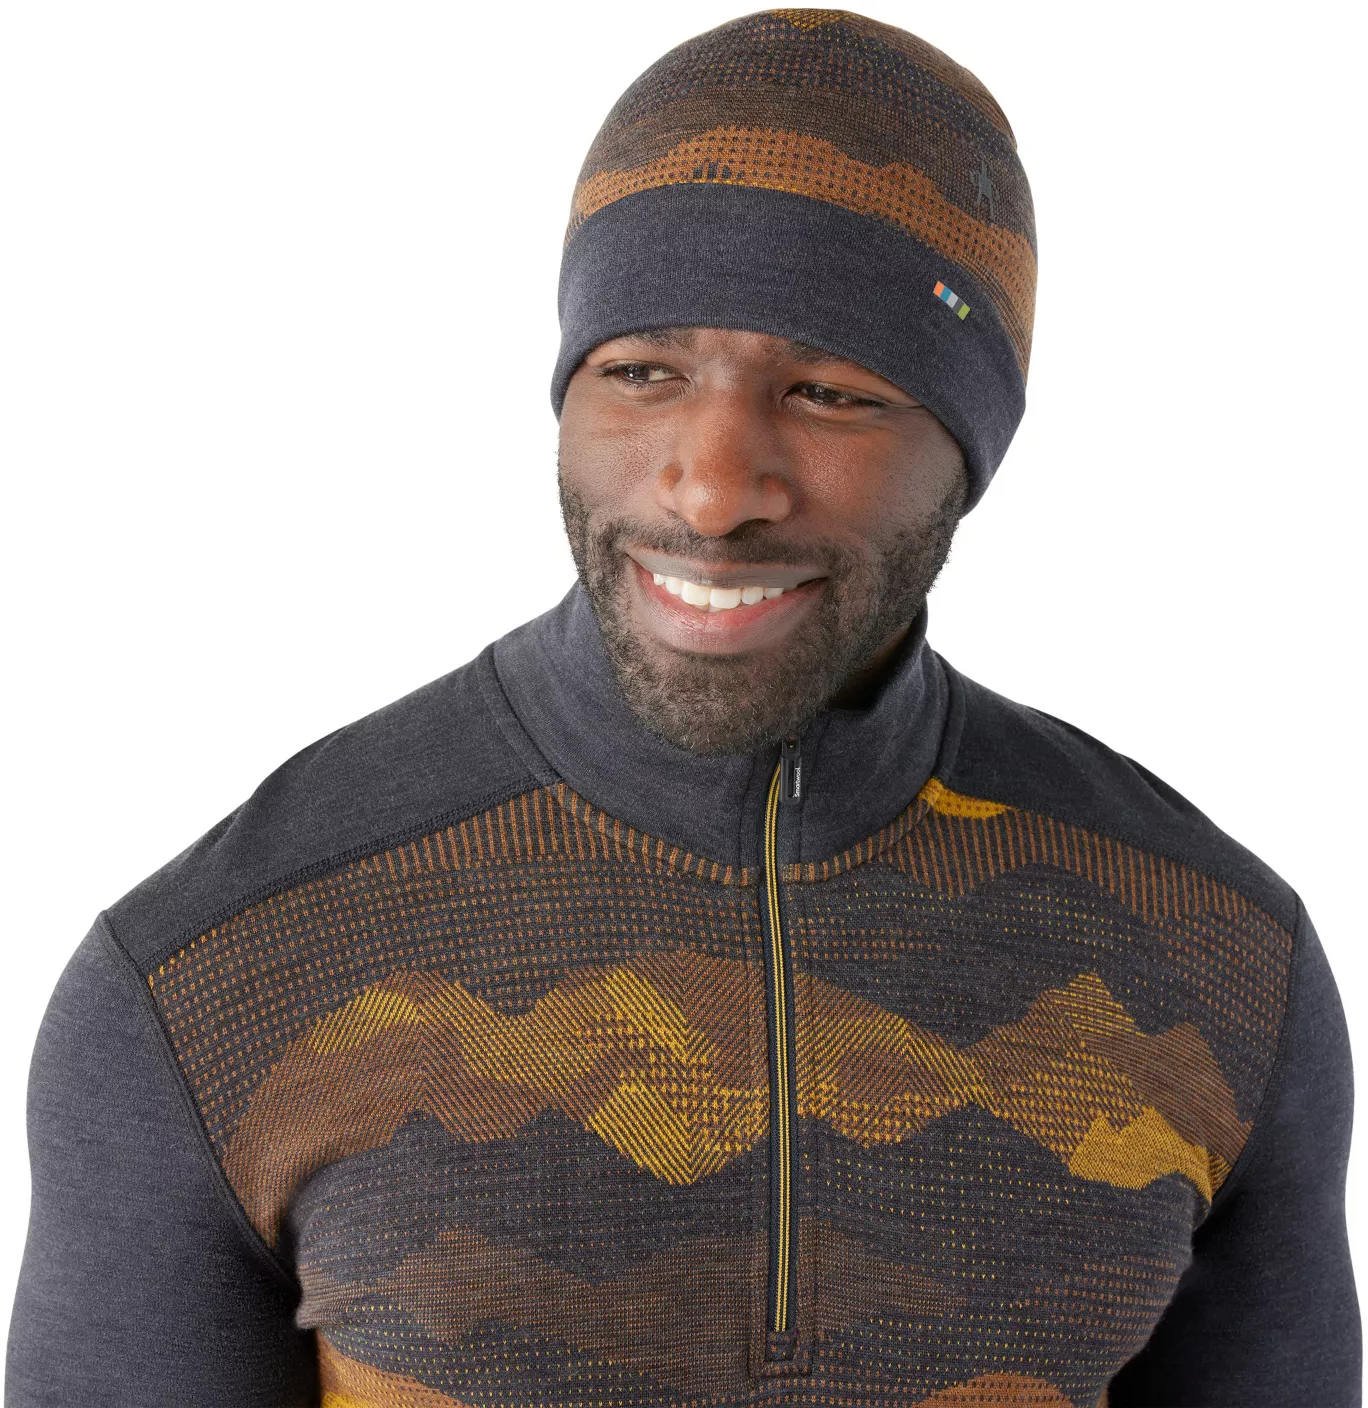 Smartwool Thermal Reversible Cuff Beanie